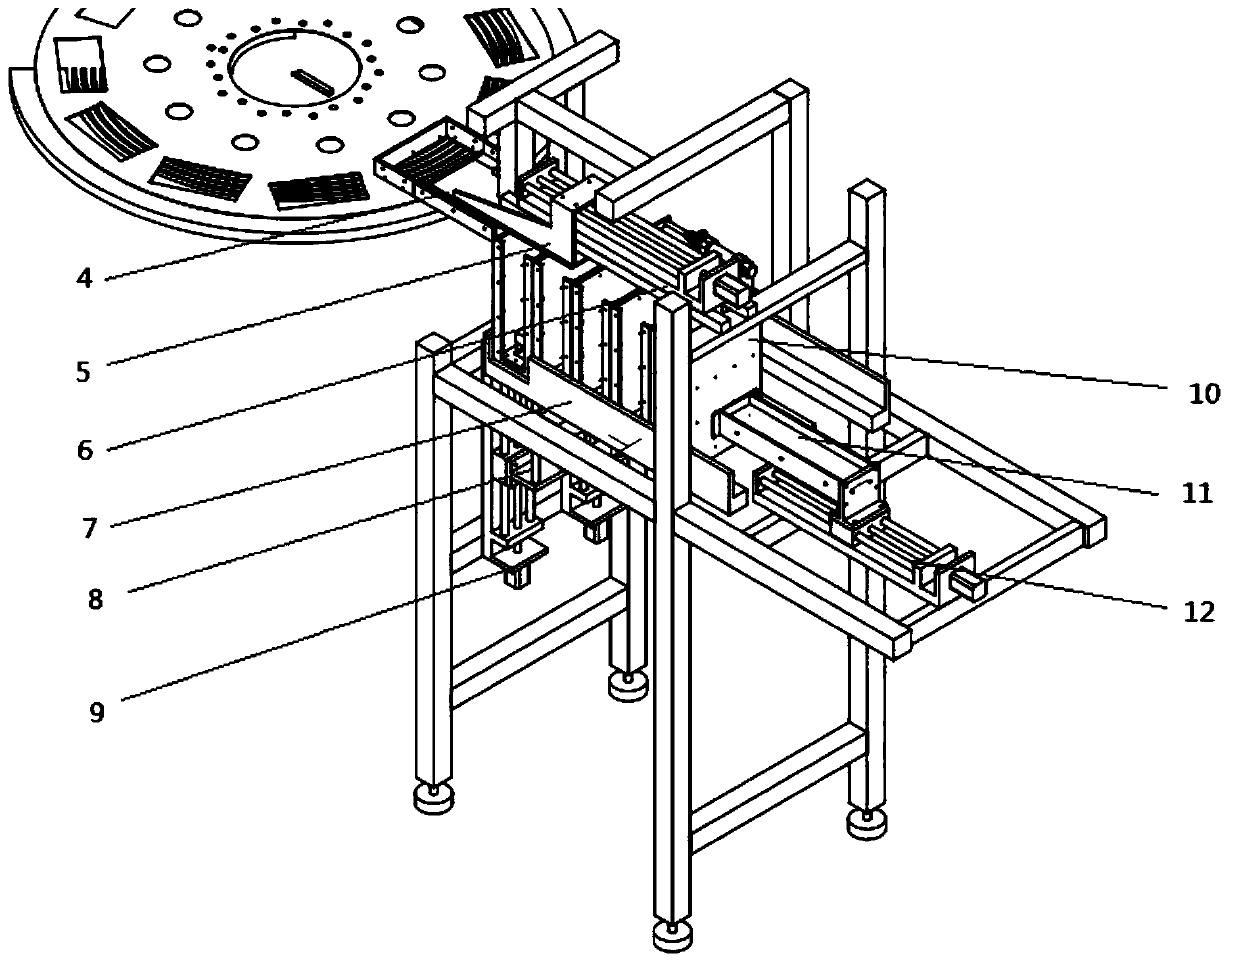 An automatic loading and unloading device for a glass grinder